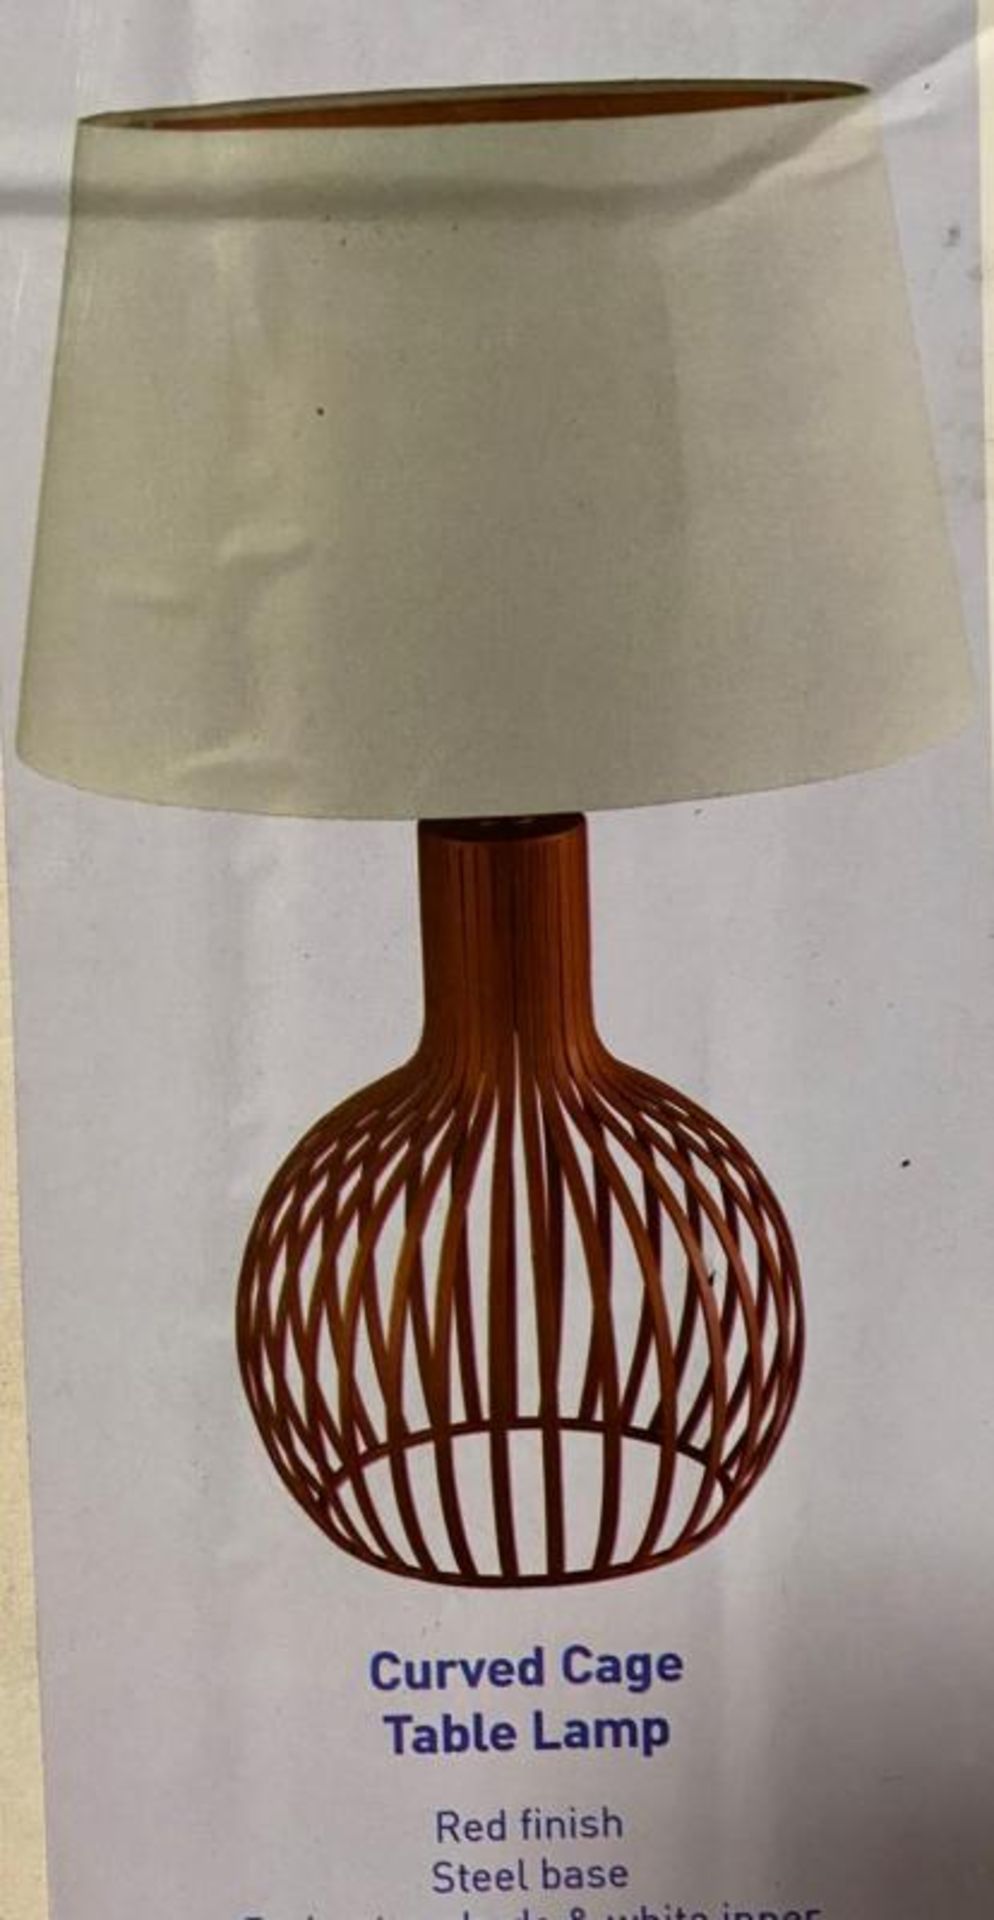 1 x Searchlight Curved Cage Table Lamp in a red finish with a steel base- Ref: 7381RE - New And Boxe - Image 3 of 4